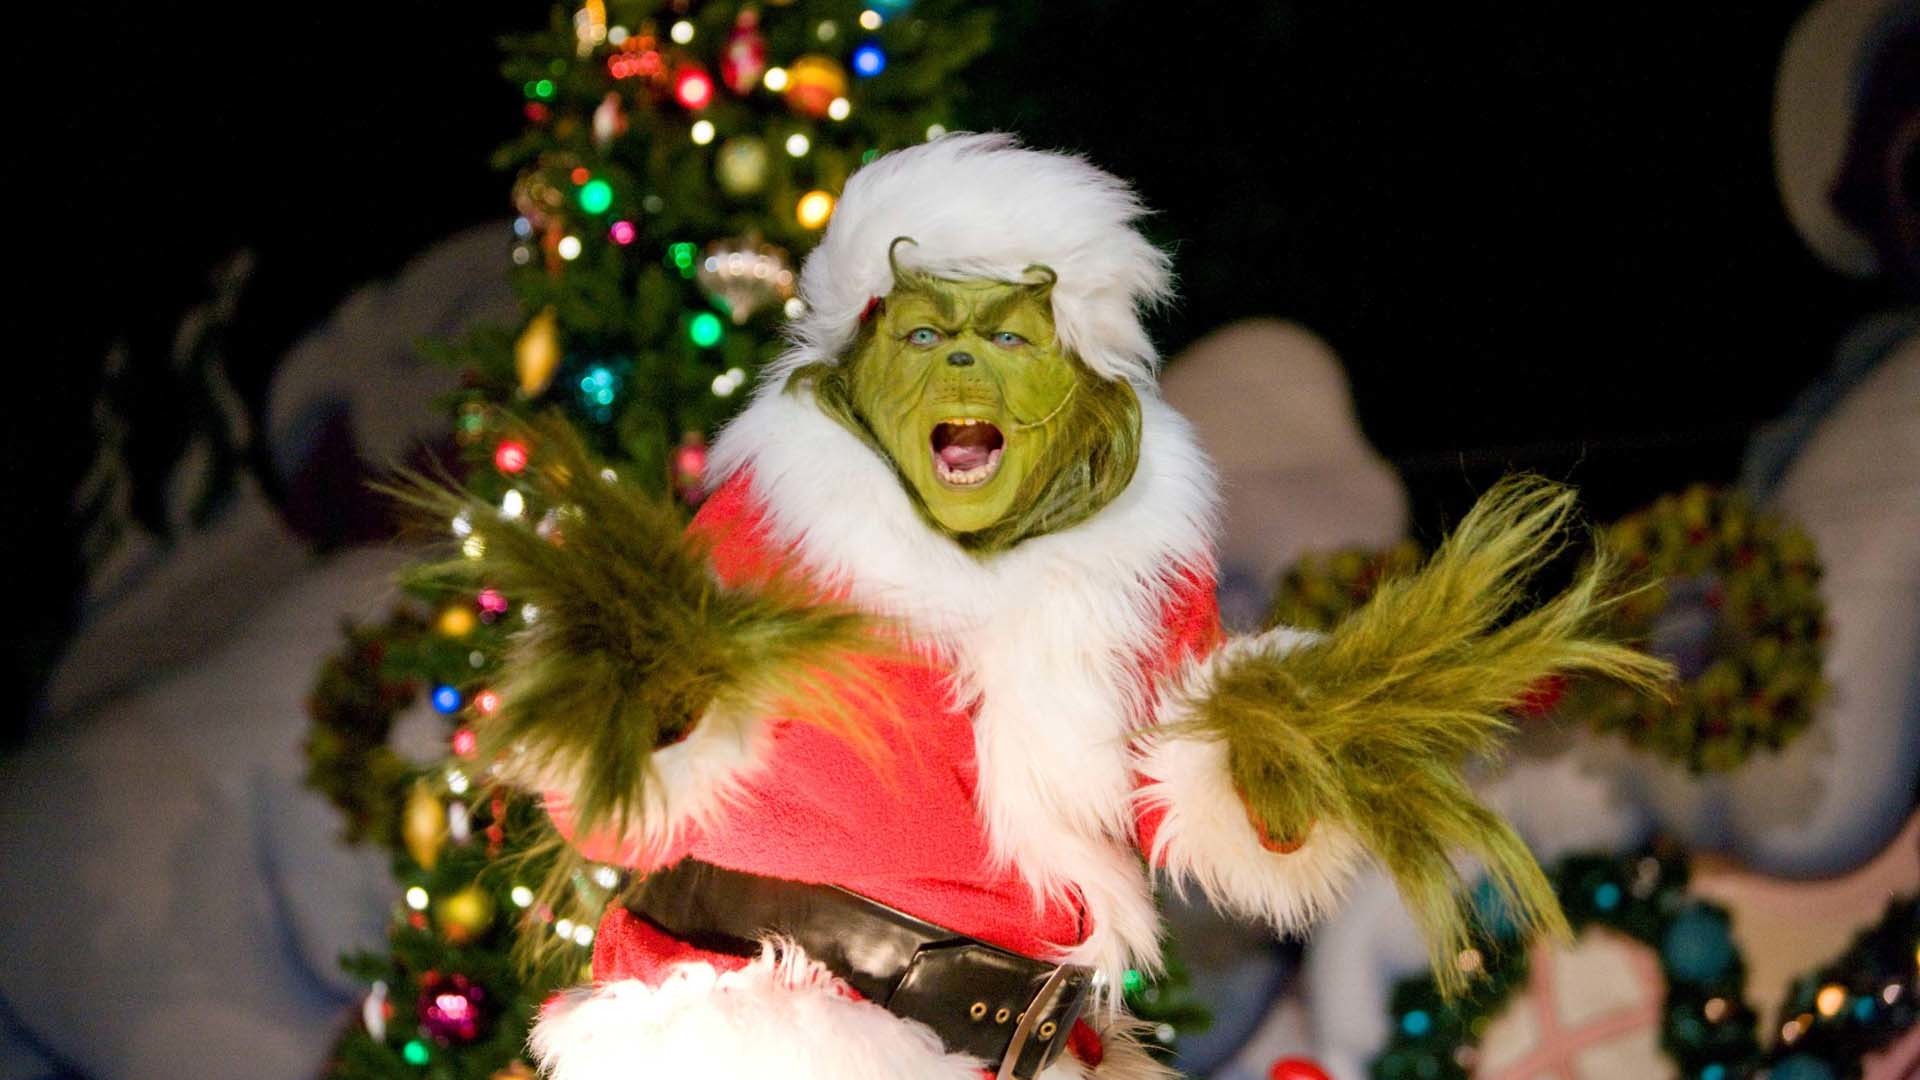 The Grinch HD Wallpapers and Backgrounds